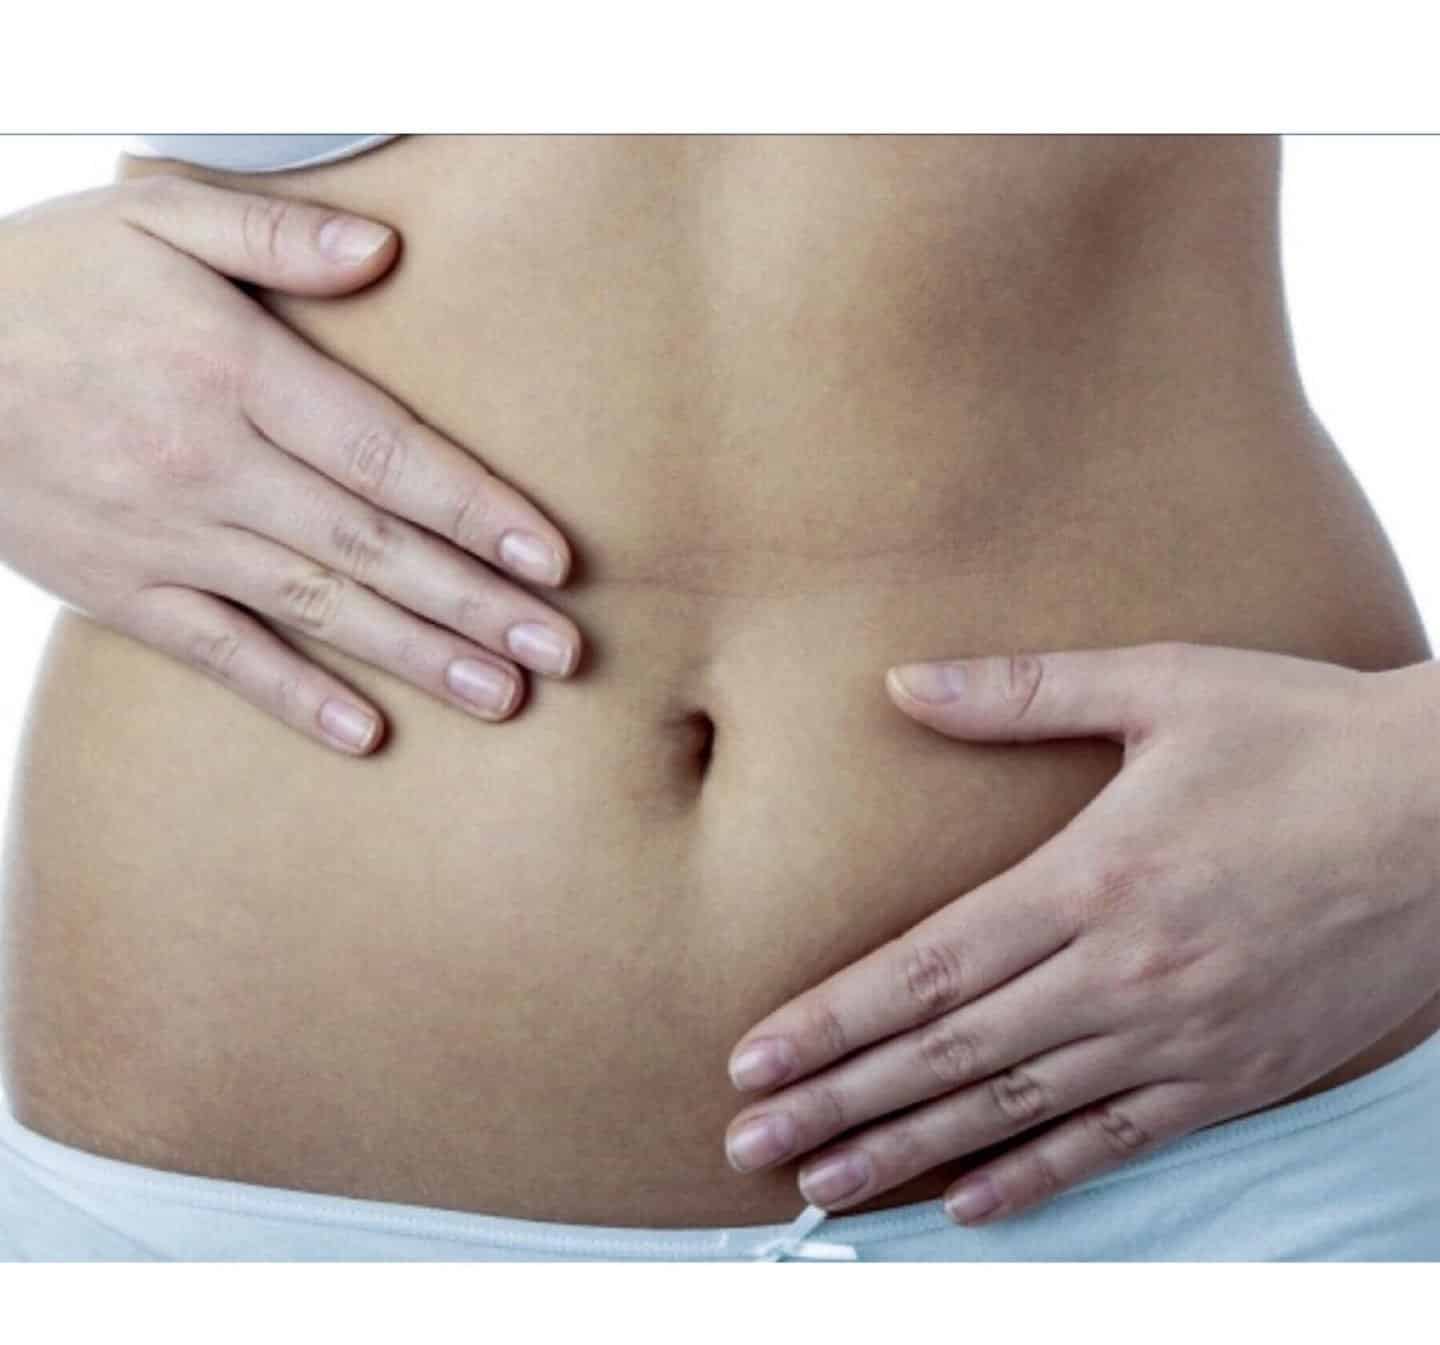 Does Stress Cause Stomach Bloating